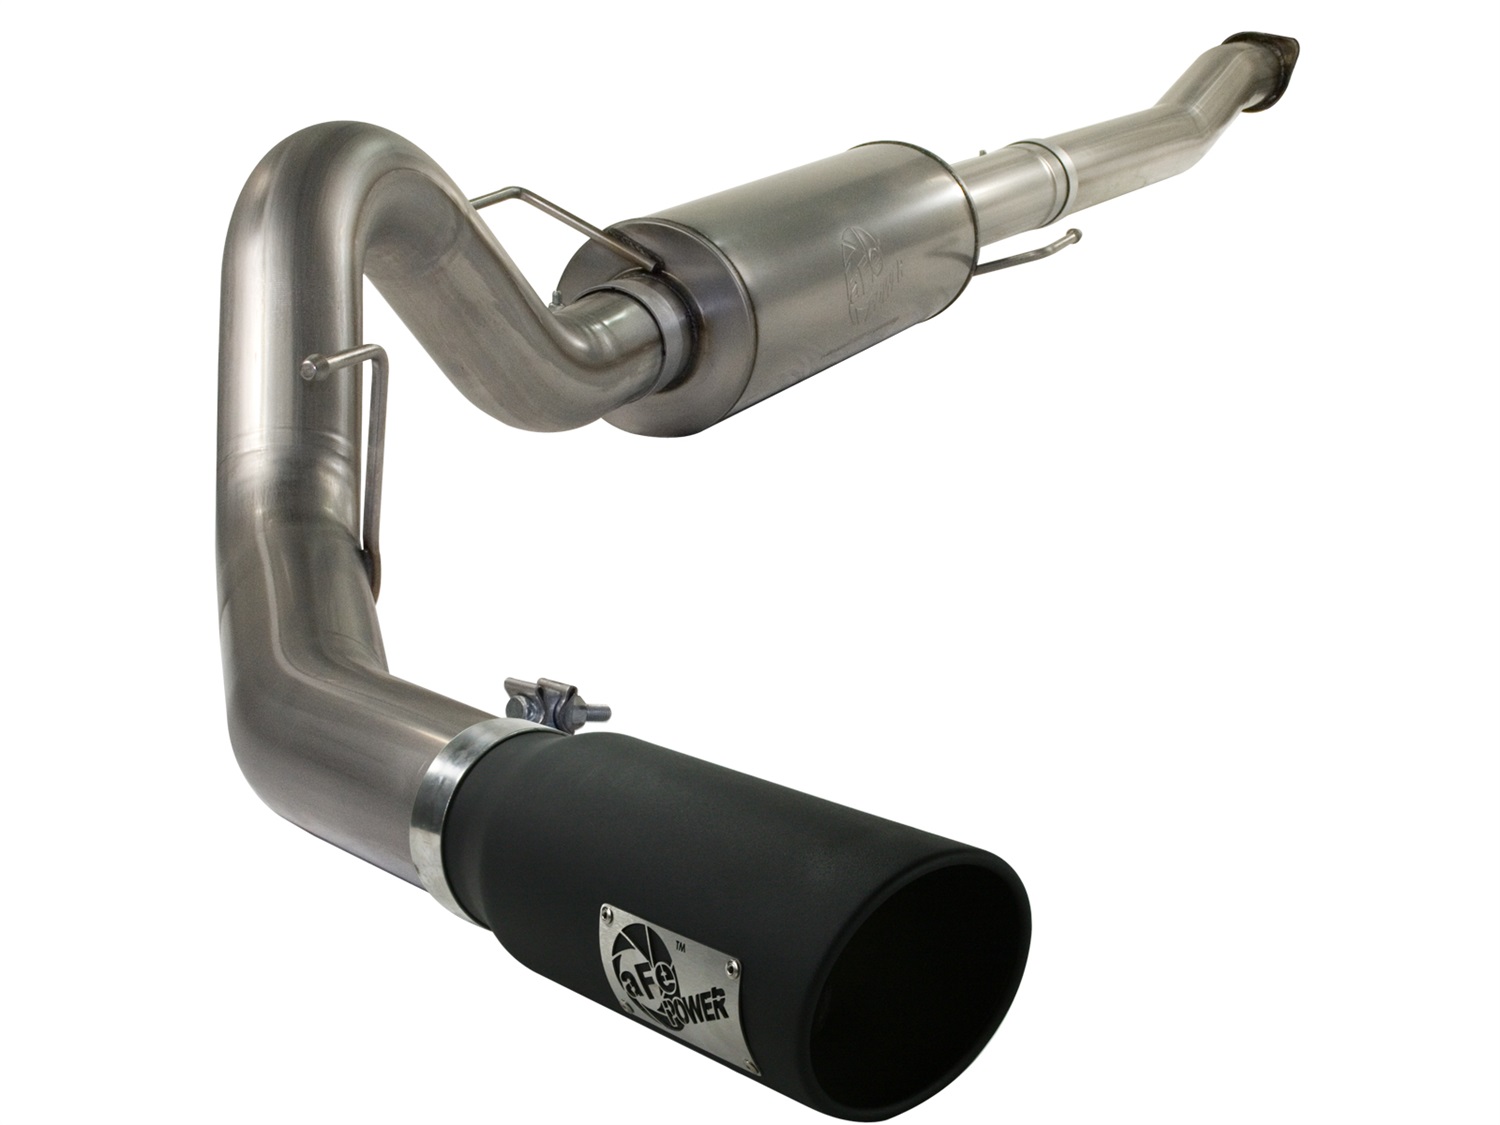 aFe Power aFe Power 49-43041-B MACHForce XP Exhaust System Fits 11-13 F-150